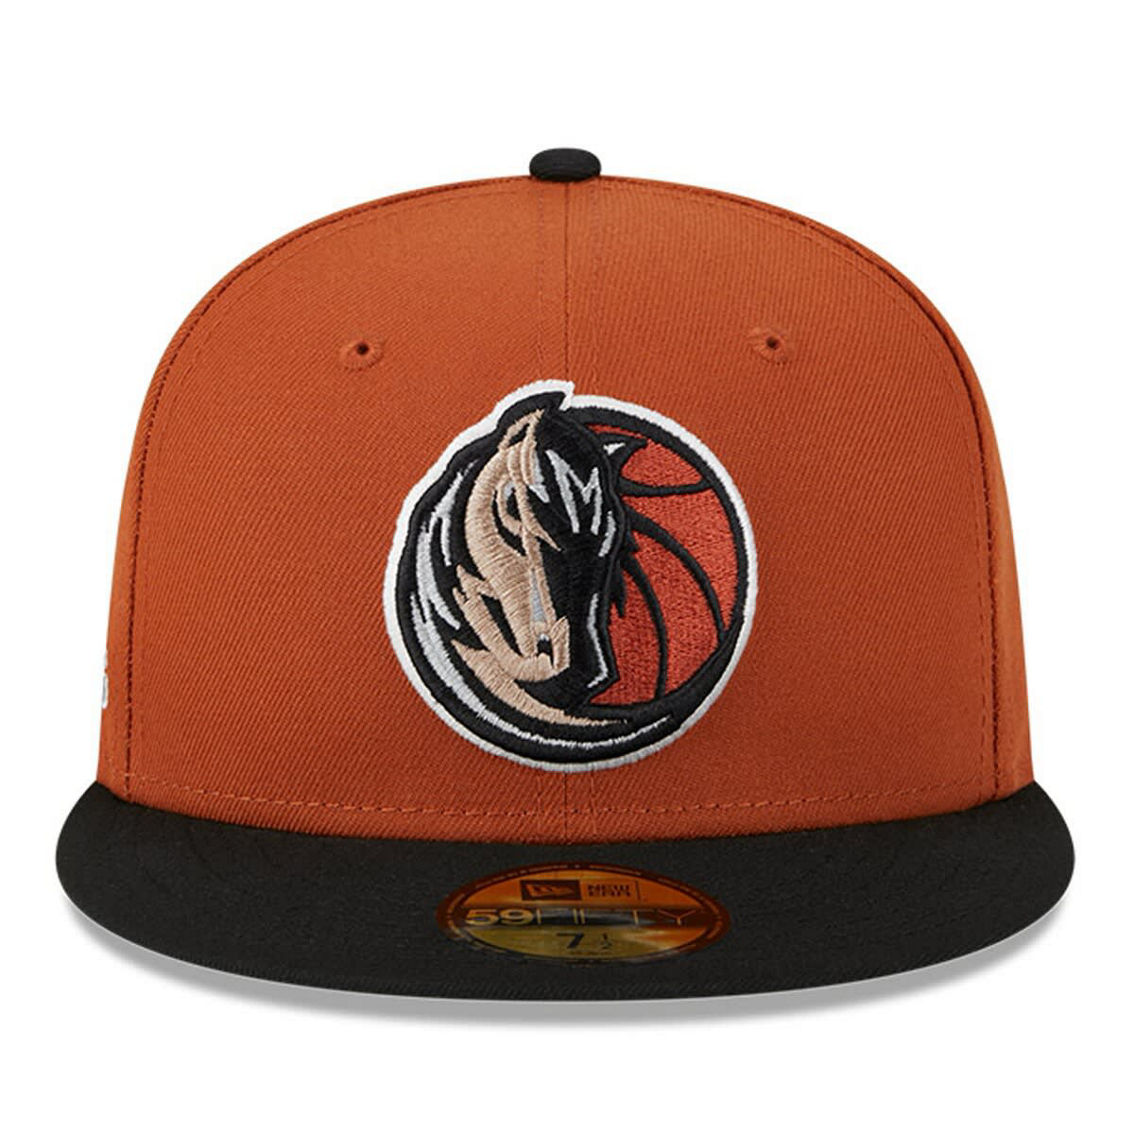 New Era Men's Rust/Black Dallas Mavericks Two-Tone 59FIFTY Fitted Hat - Image 3 of 4